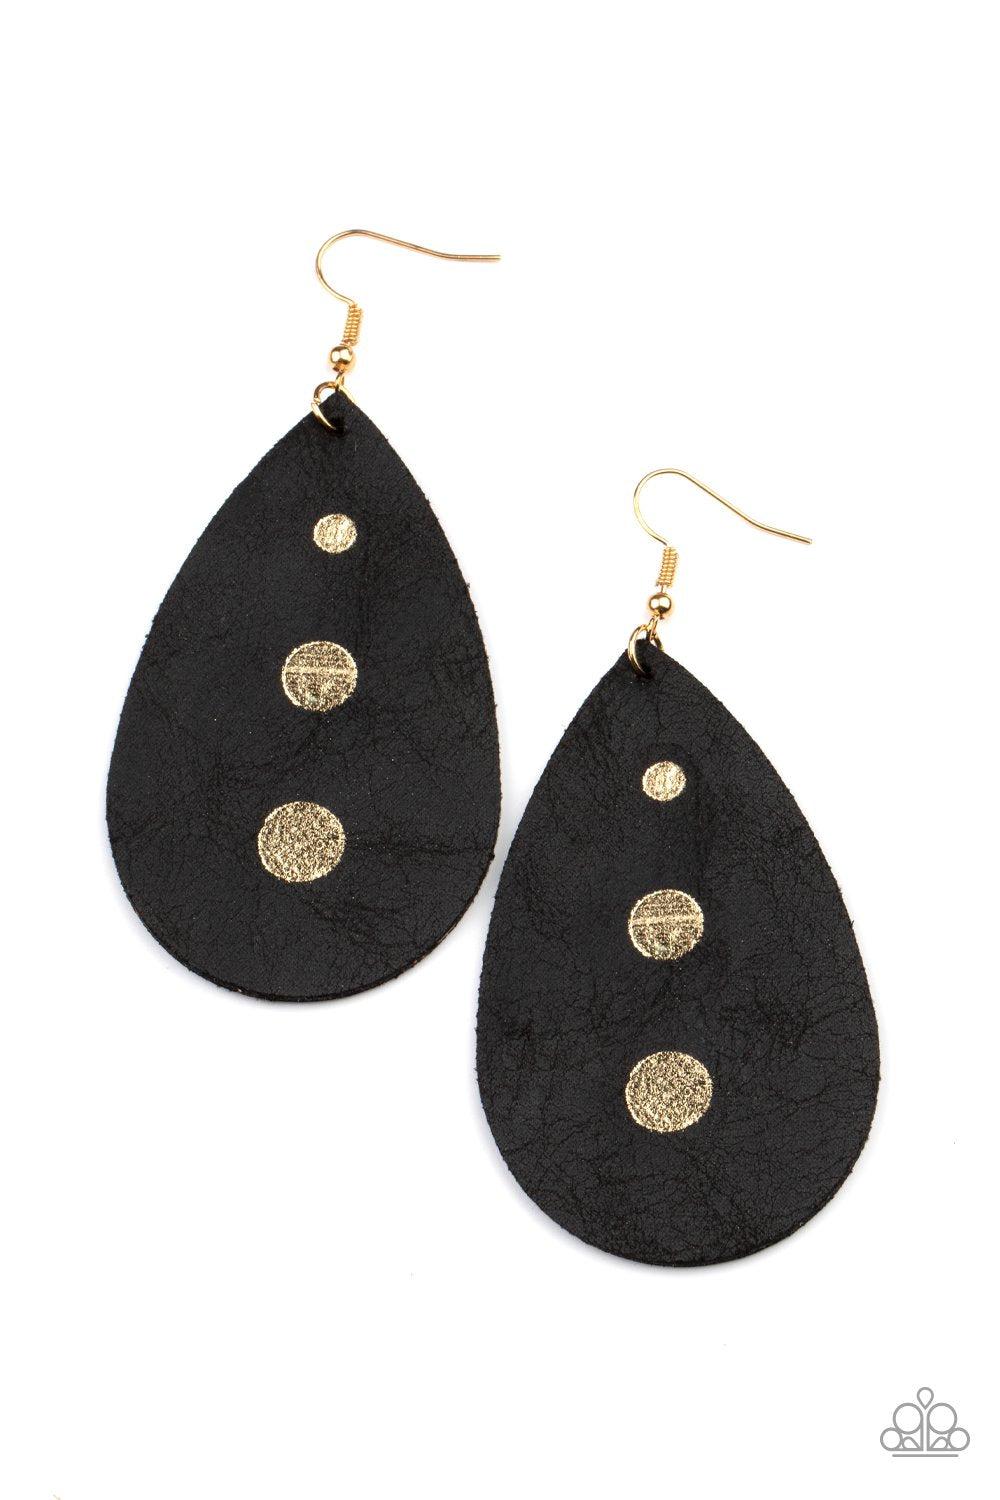 Rustic Torrent Black Leather Earrings - Paparazzi Accessories- lightbox - CarasShop.com - $5 Jewelry by Cara Jewels